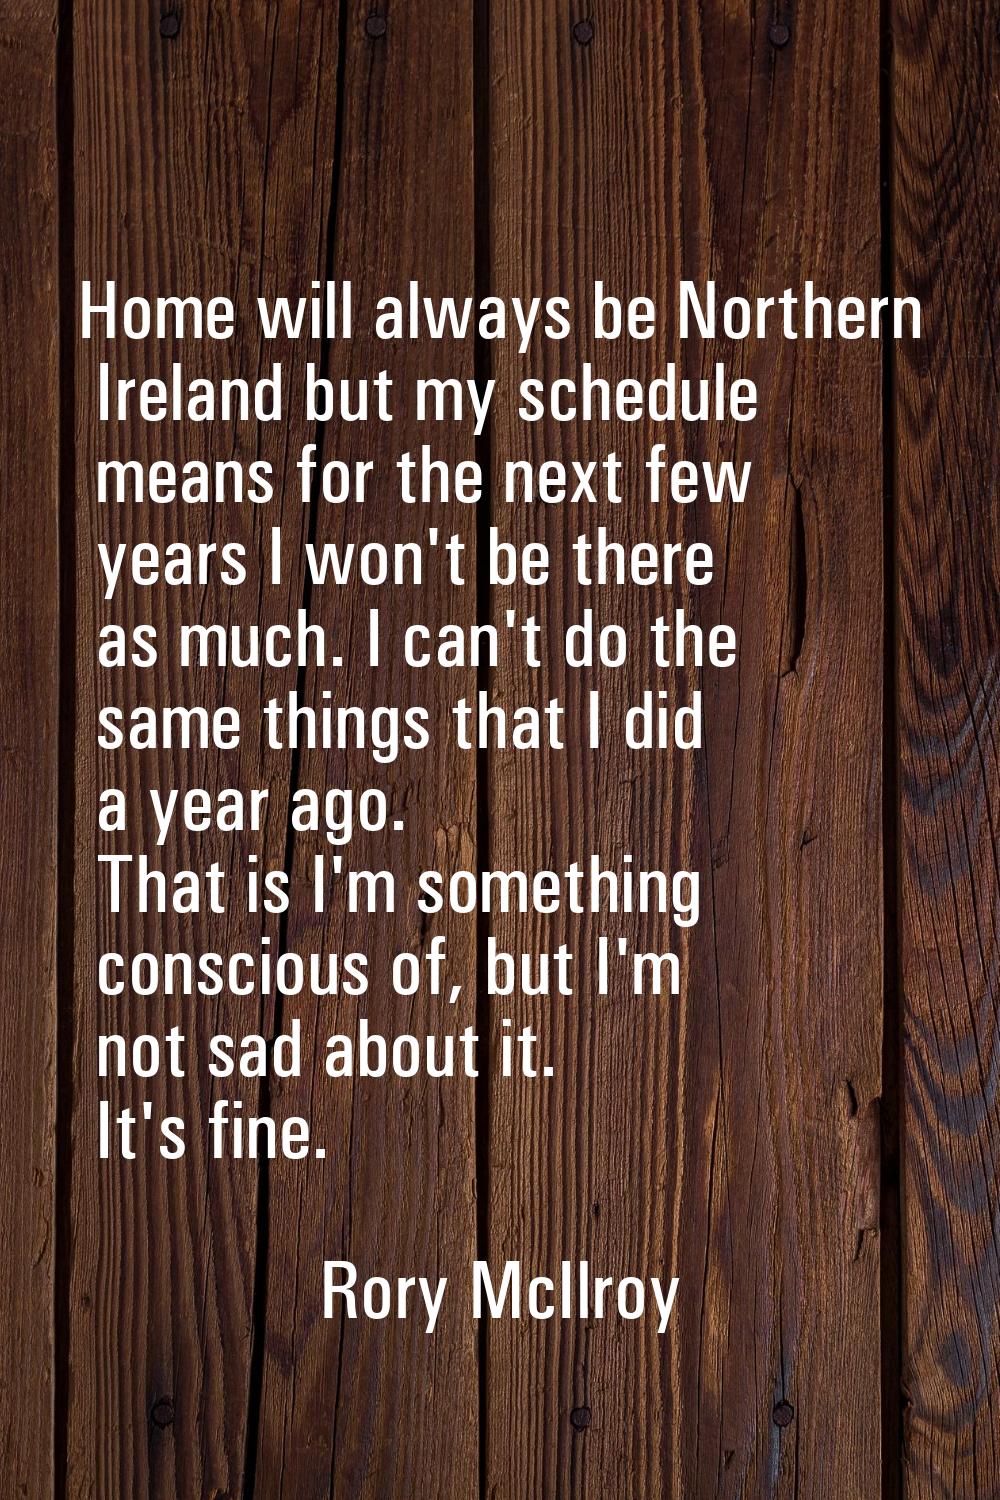 Home will always be Northern Ireland but my schedule means for the next few years I won't be there 